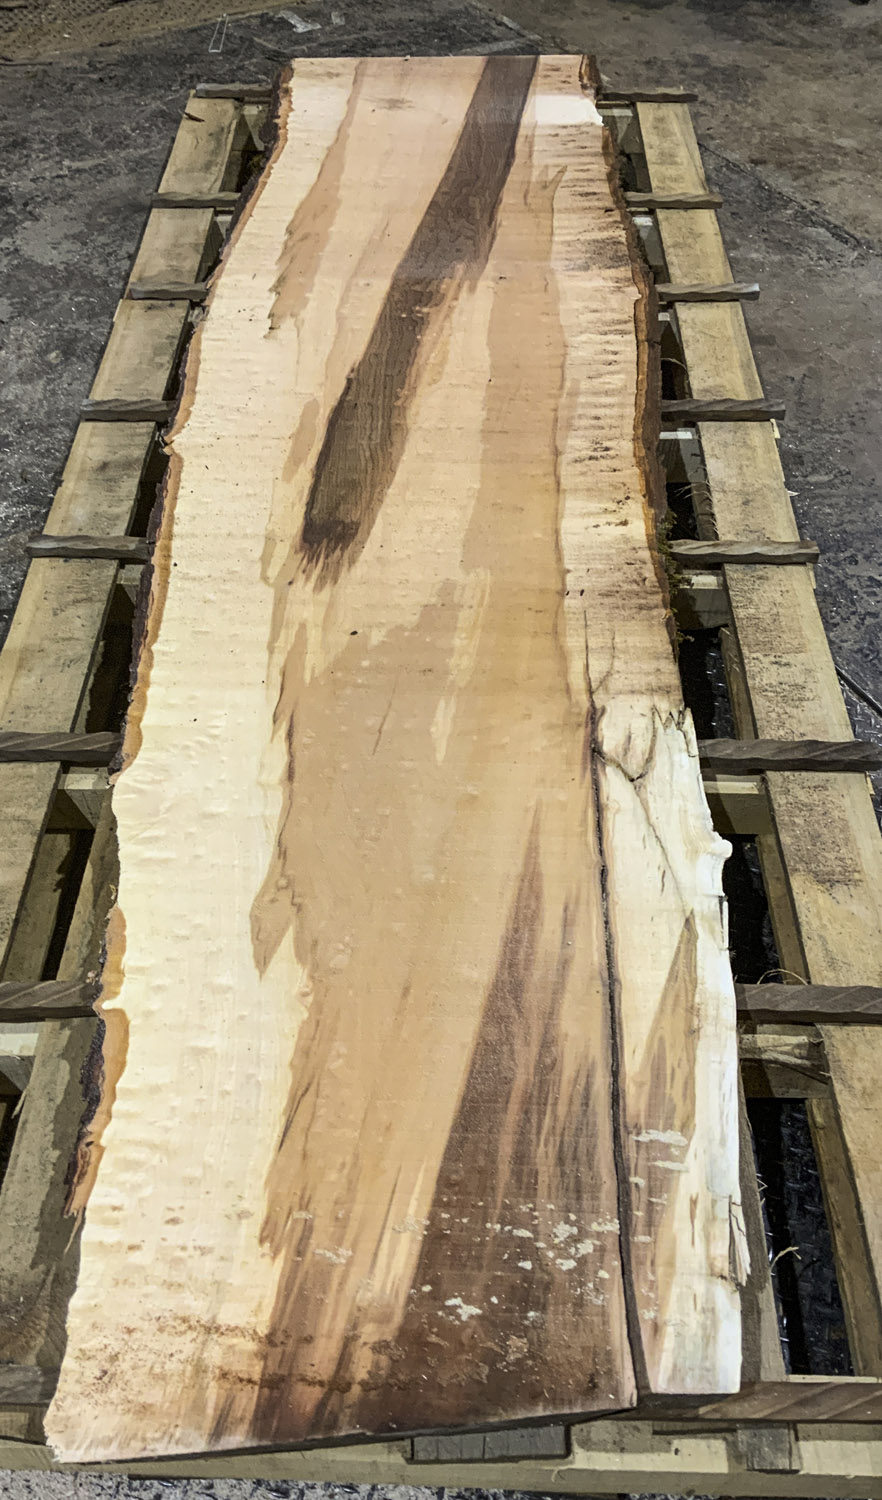 Heartwood in Maple is considered "undesirable" by many... but check out these amazing slabs we cut this week - the contrast between the heart and sap is so wild it almost looks like paint.